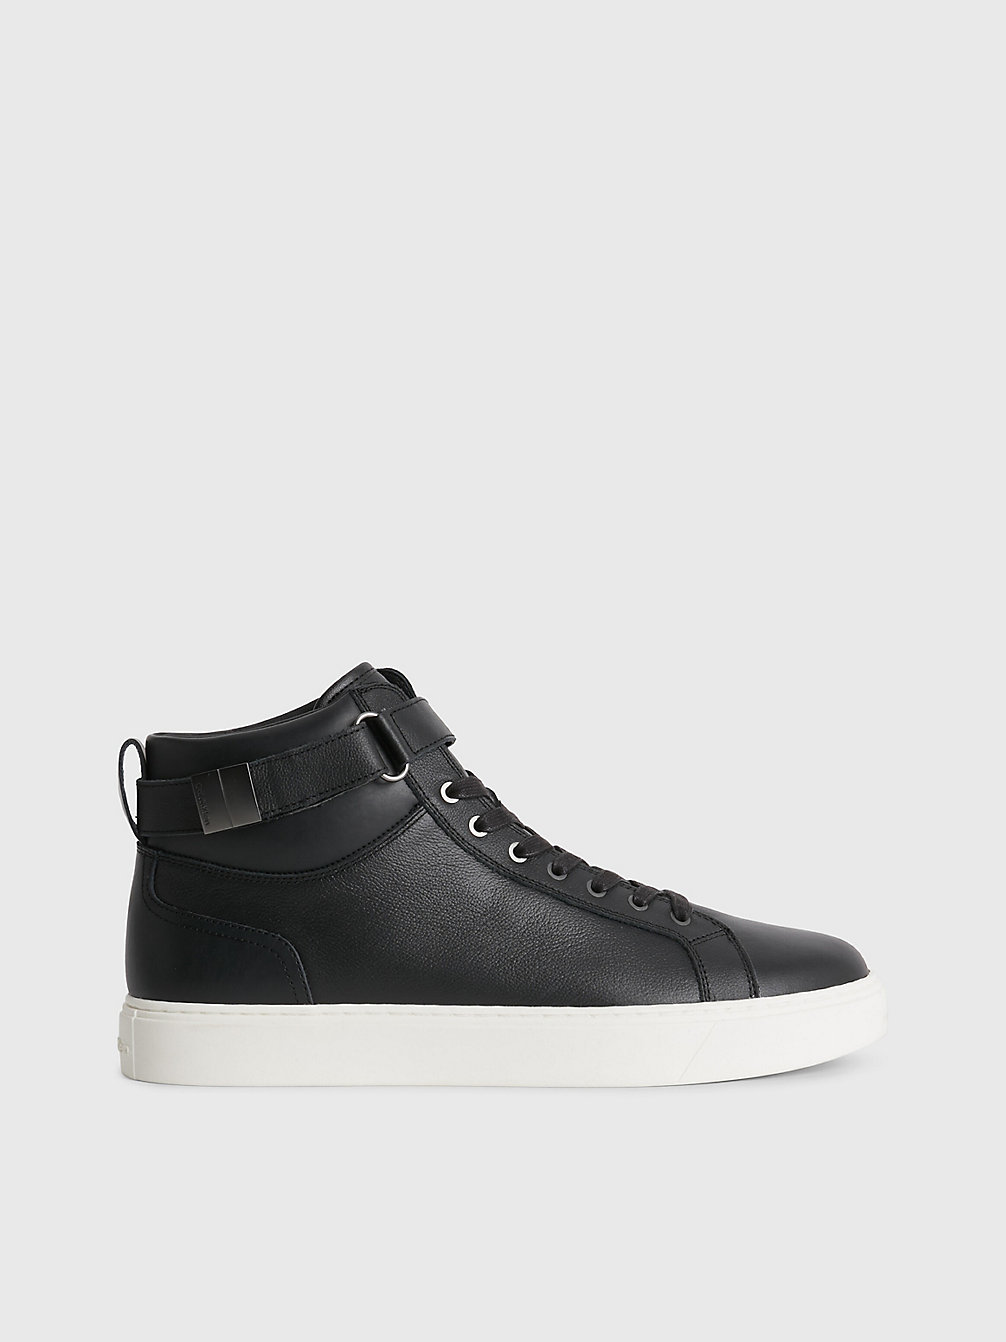 CK BLACK Leather High-Top Trainers undefined men Calvin Klein